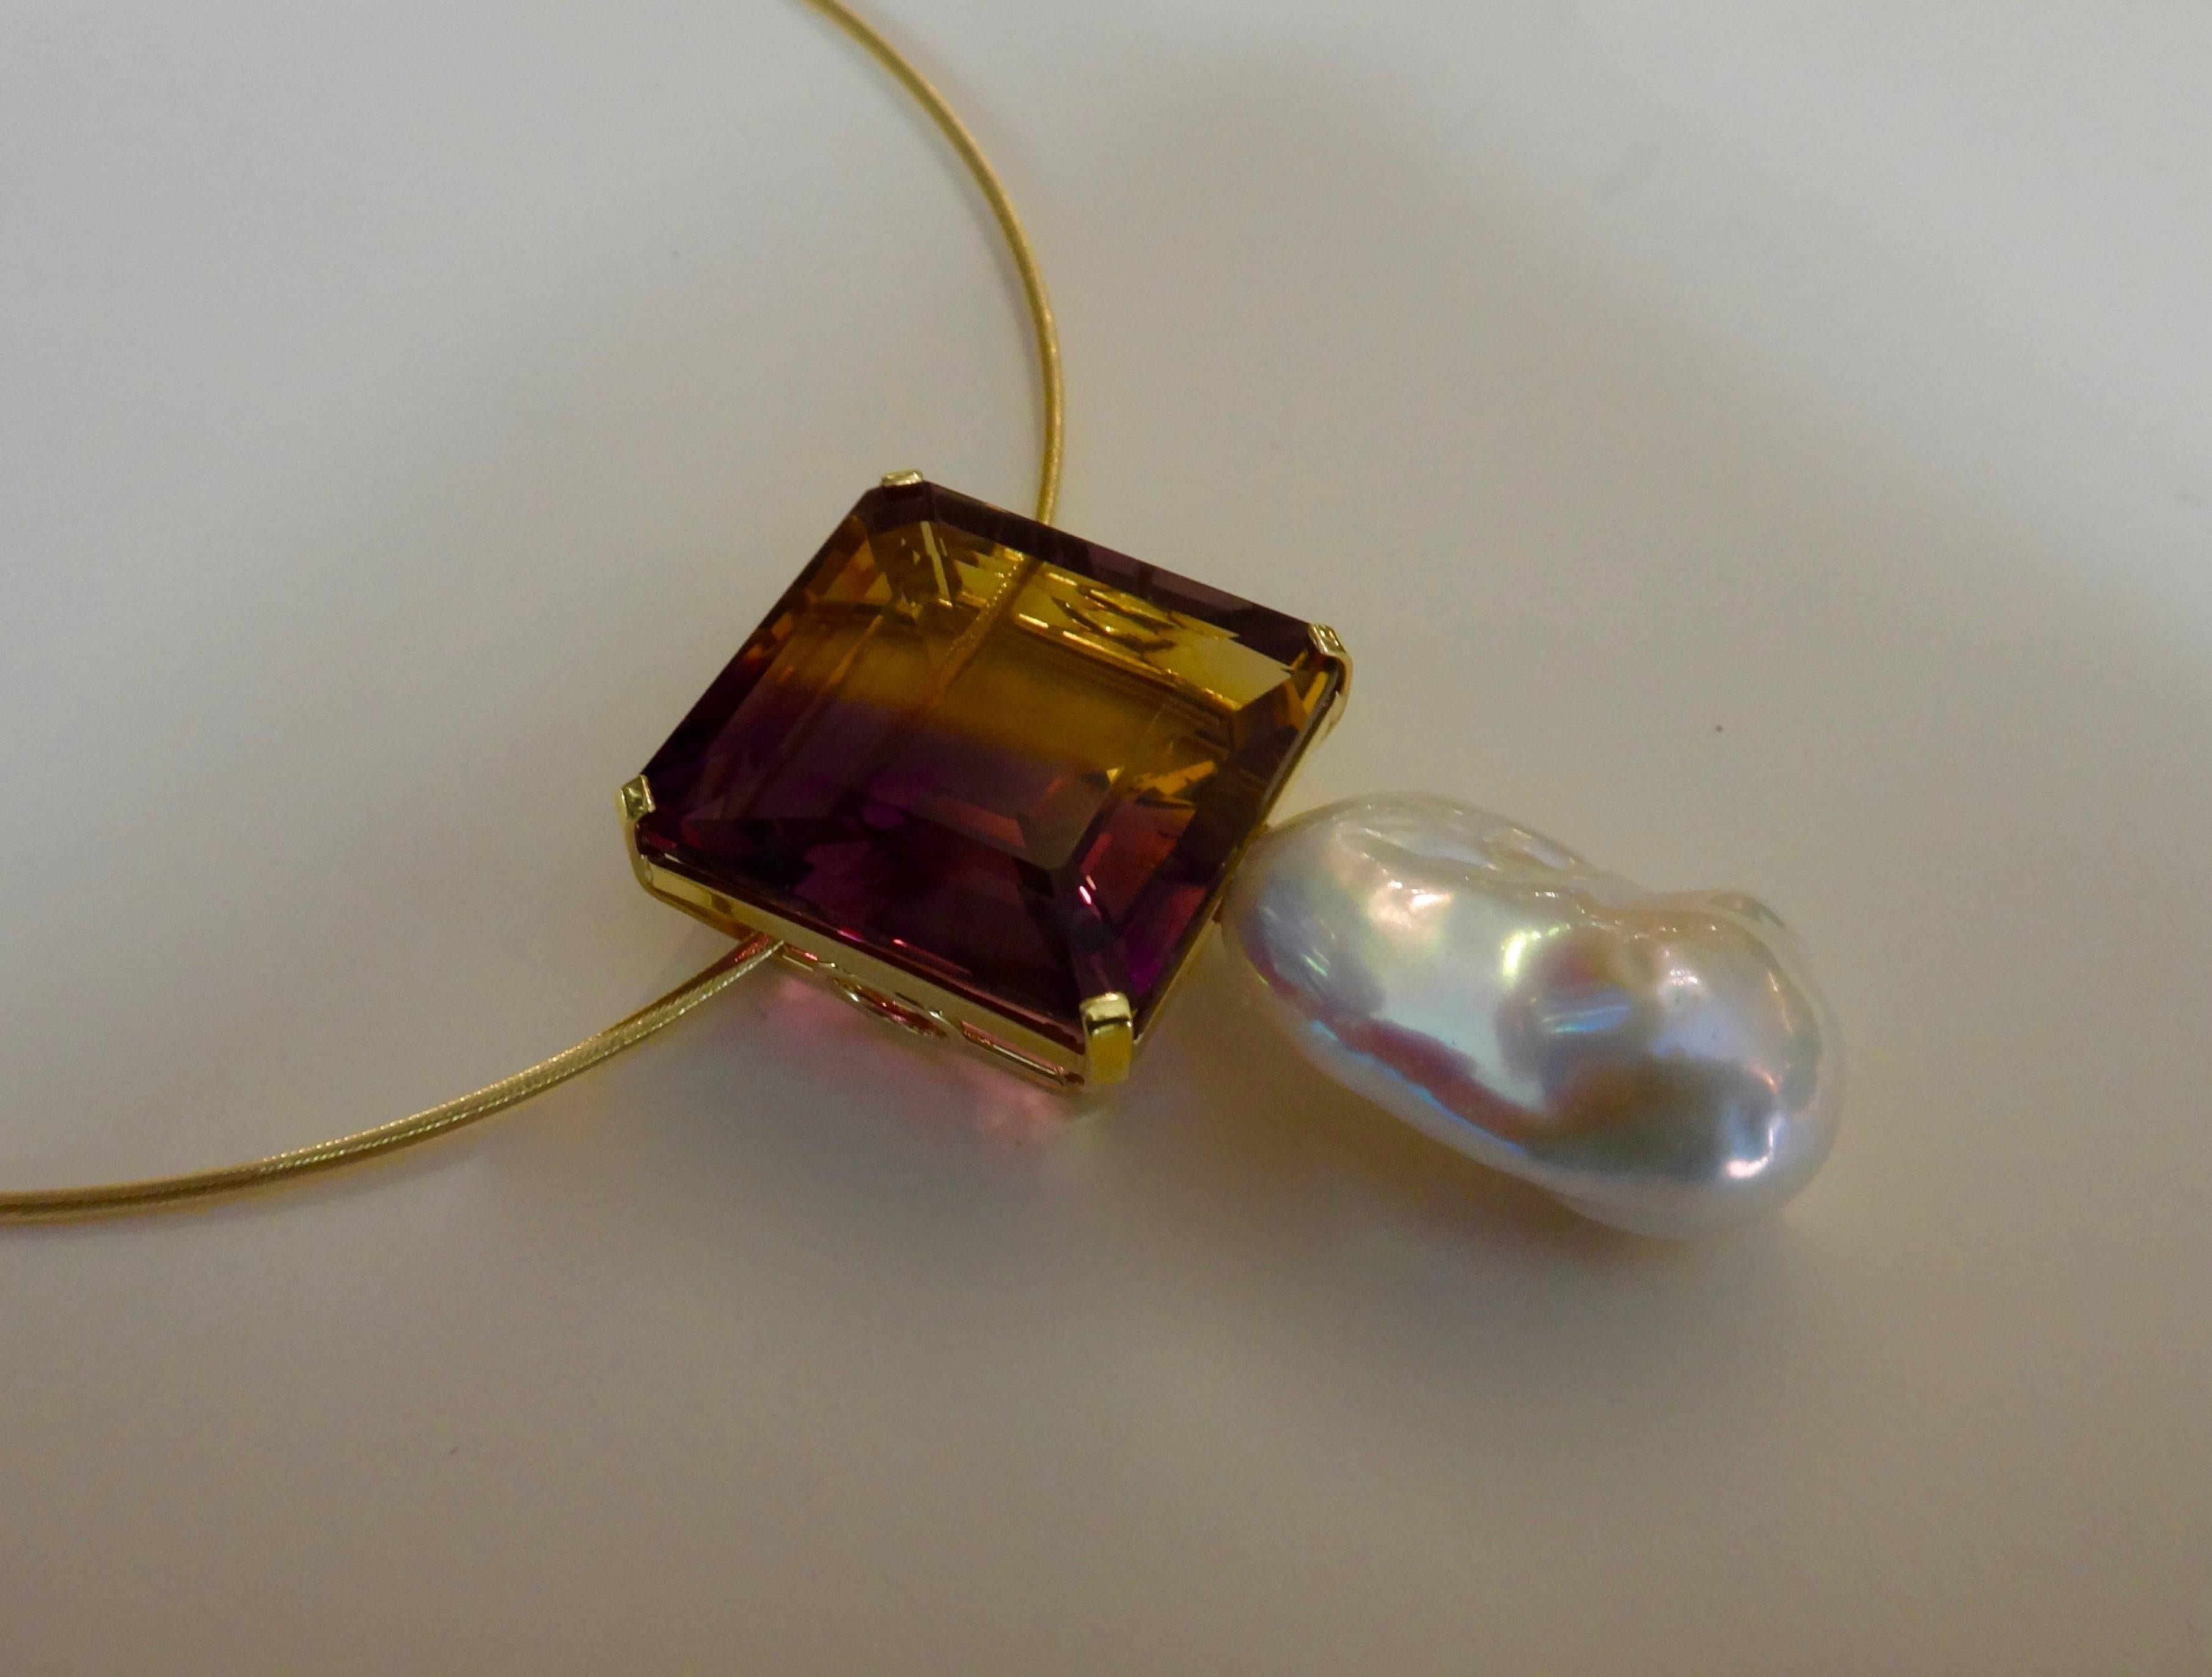 A ginormous ametrine of 56.66 carats is paired with a white baroque cultured pearl in this bold statement pendant.  Ametrine is a naturally occurring variety of quartz.  It is a mix of amethyst and citrine with zones of purple and yellow or orange. 